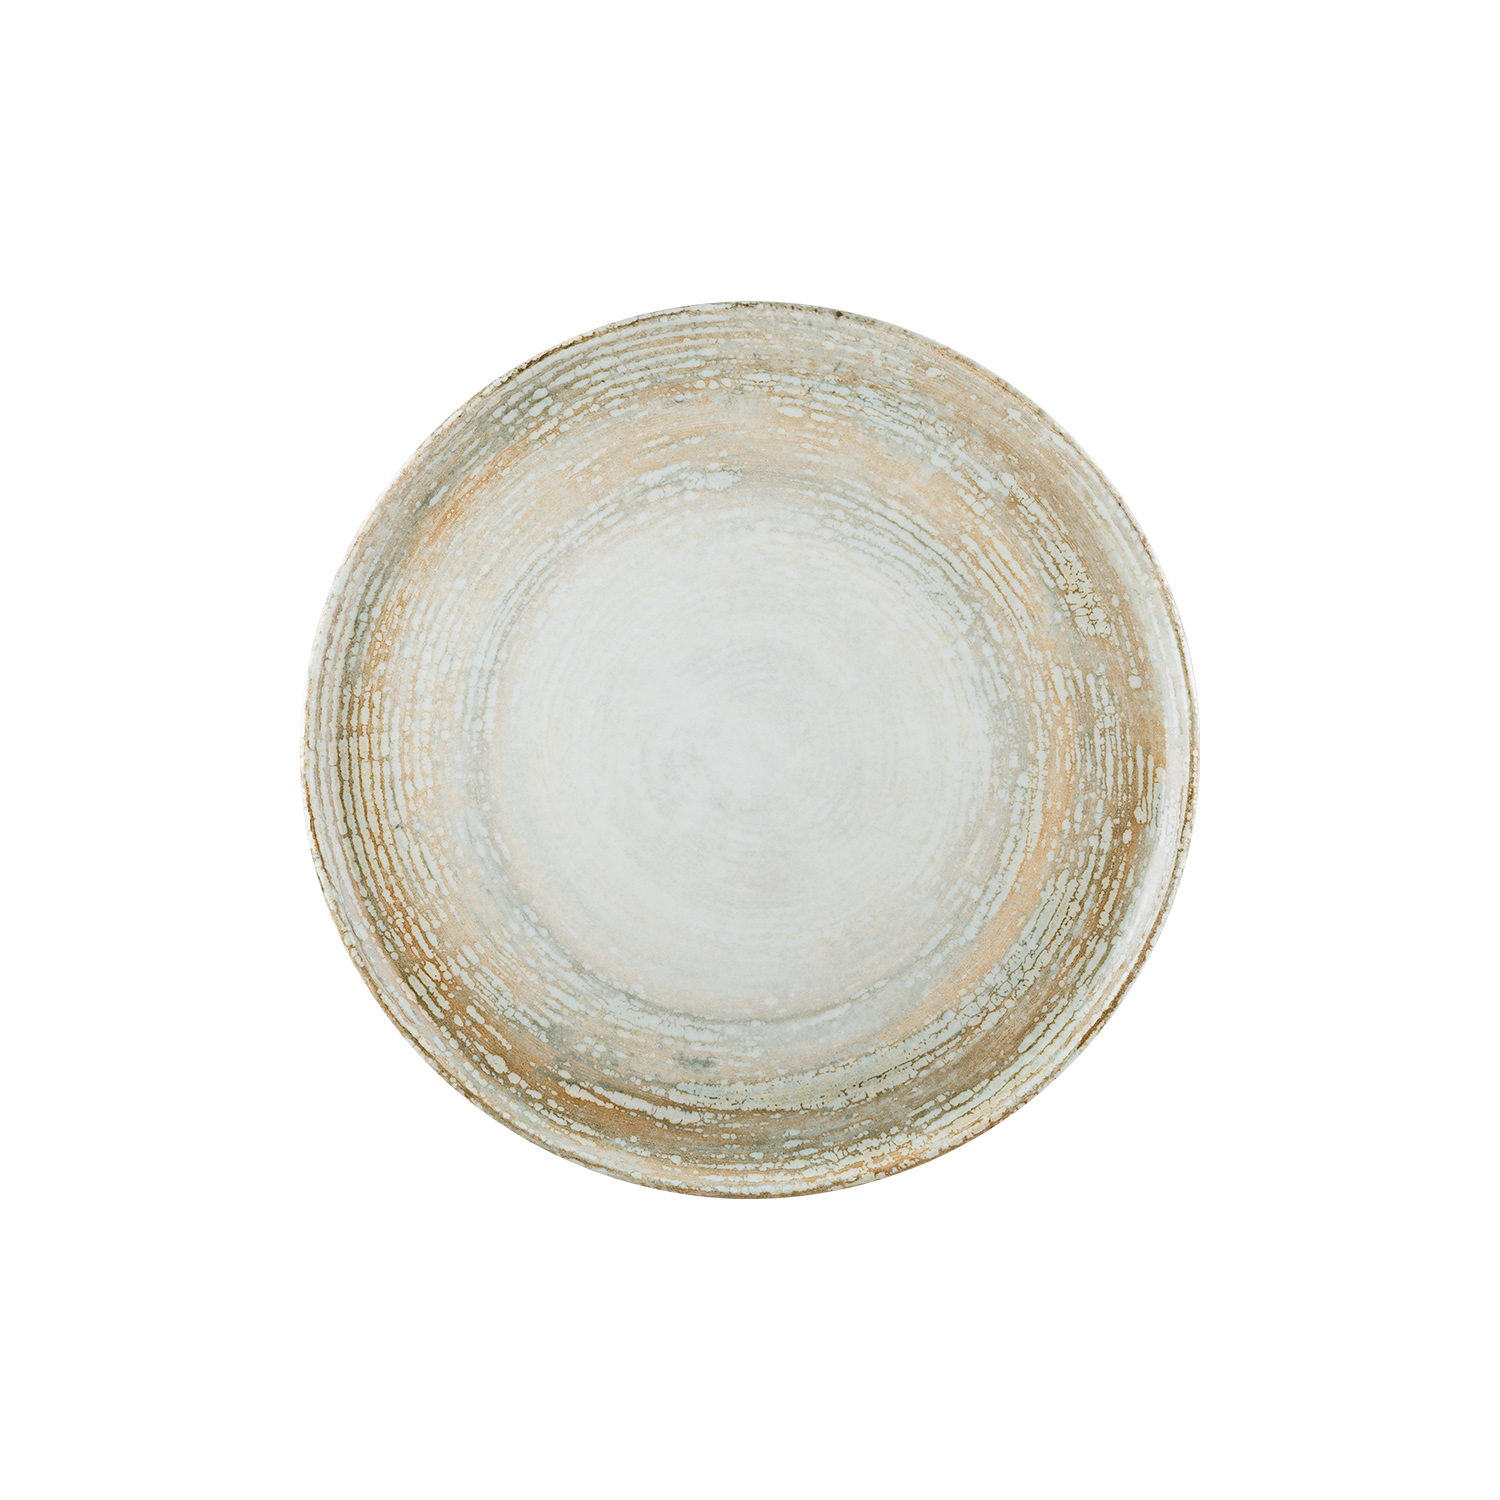 Patera Porcelain Pizza Plate Brown Round 12.5″ x 12.5″ x 0.75″  CasePack:6